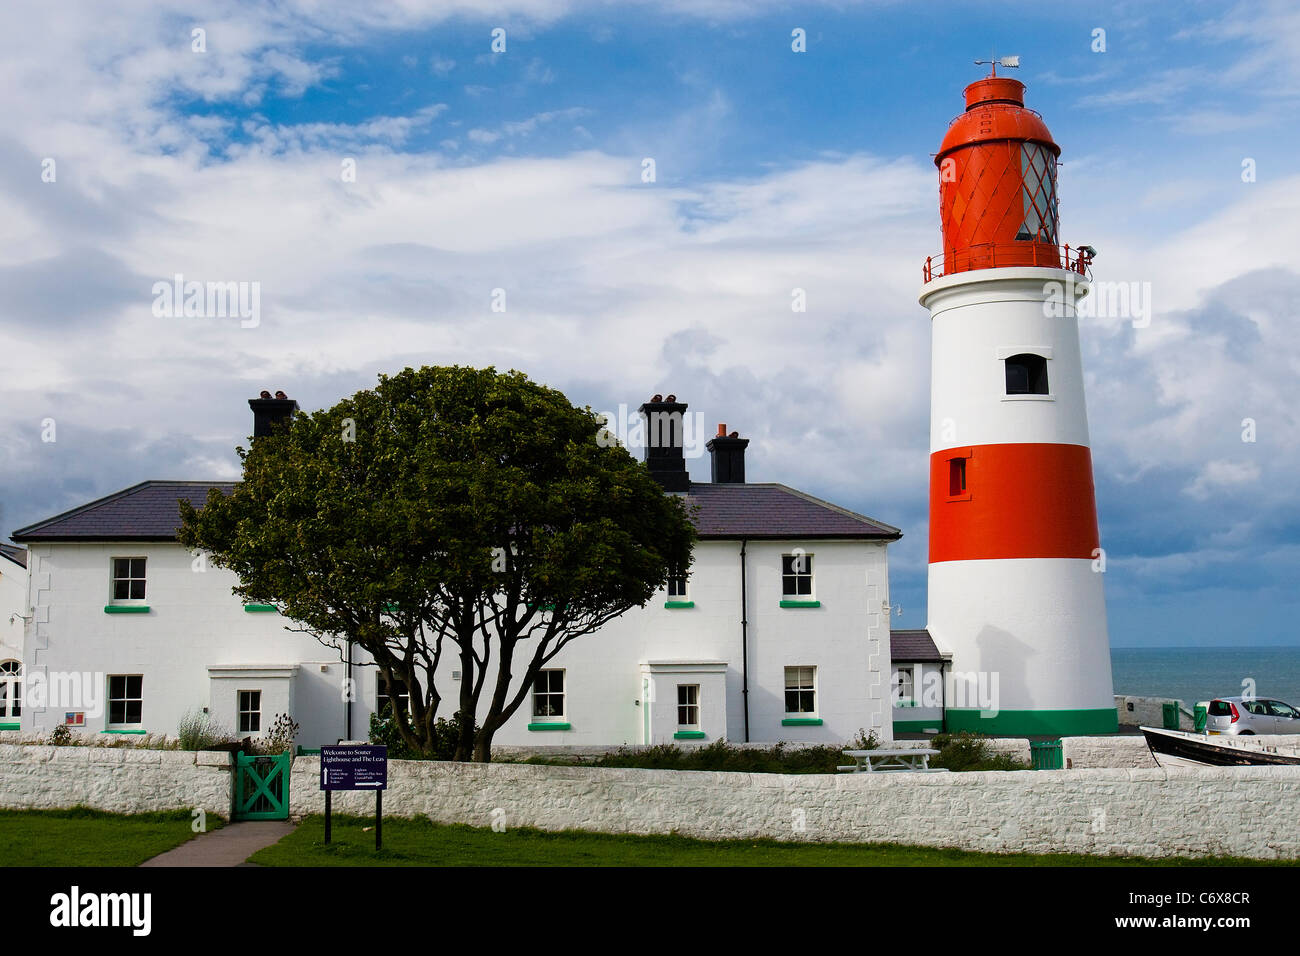 Souter lighthouse and lighthouse keepers cottage, Sunderland, Tyne and Wear, UK. Stock Photo